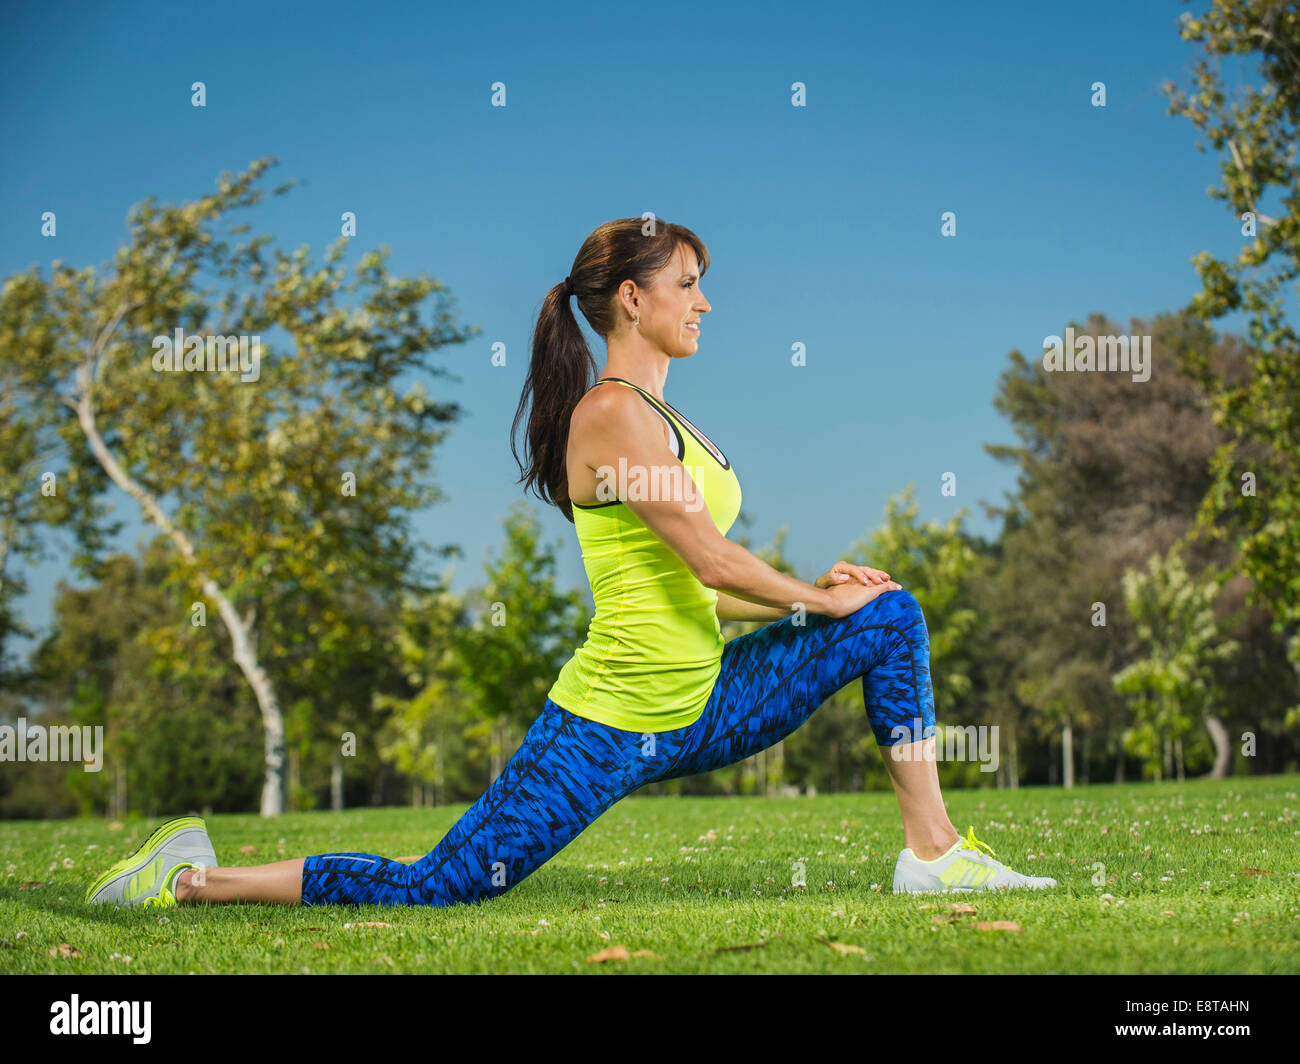 Mixed Race woman stretching in park Banque D'Images